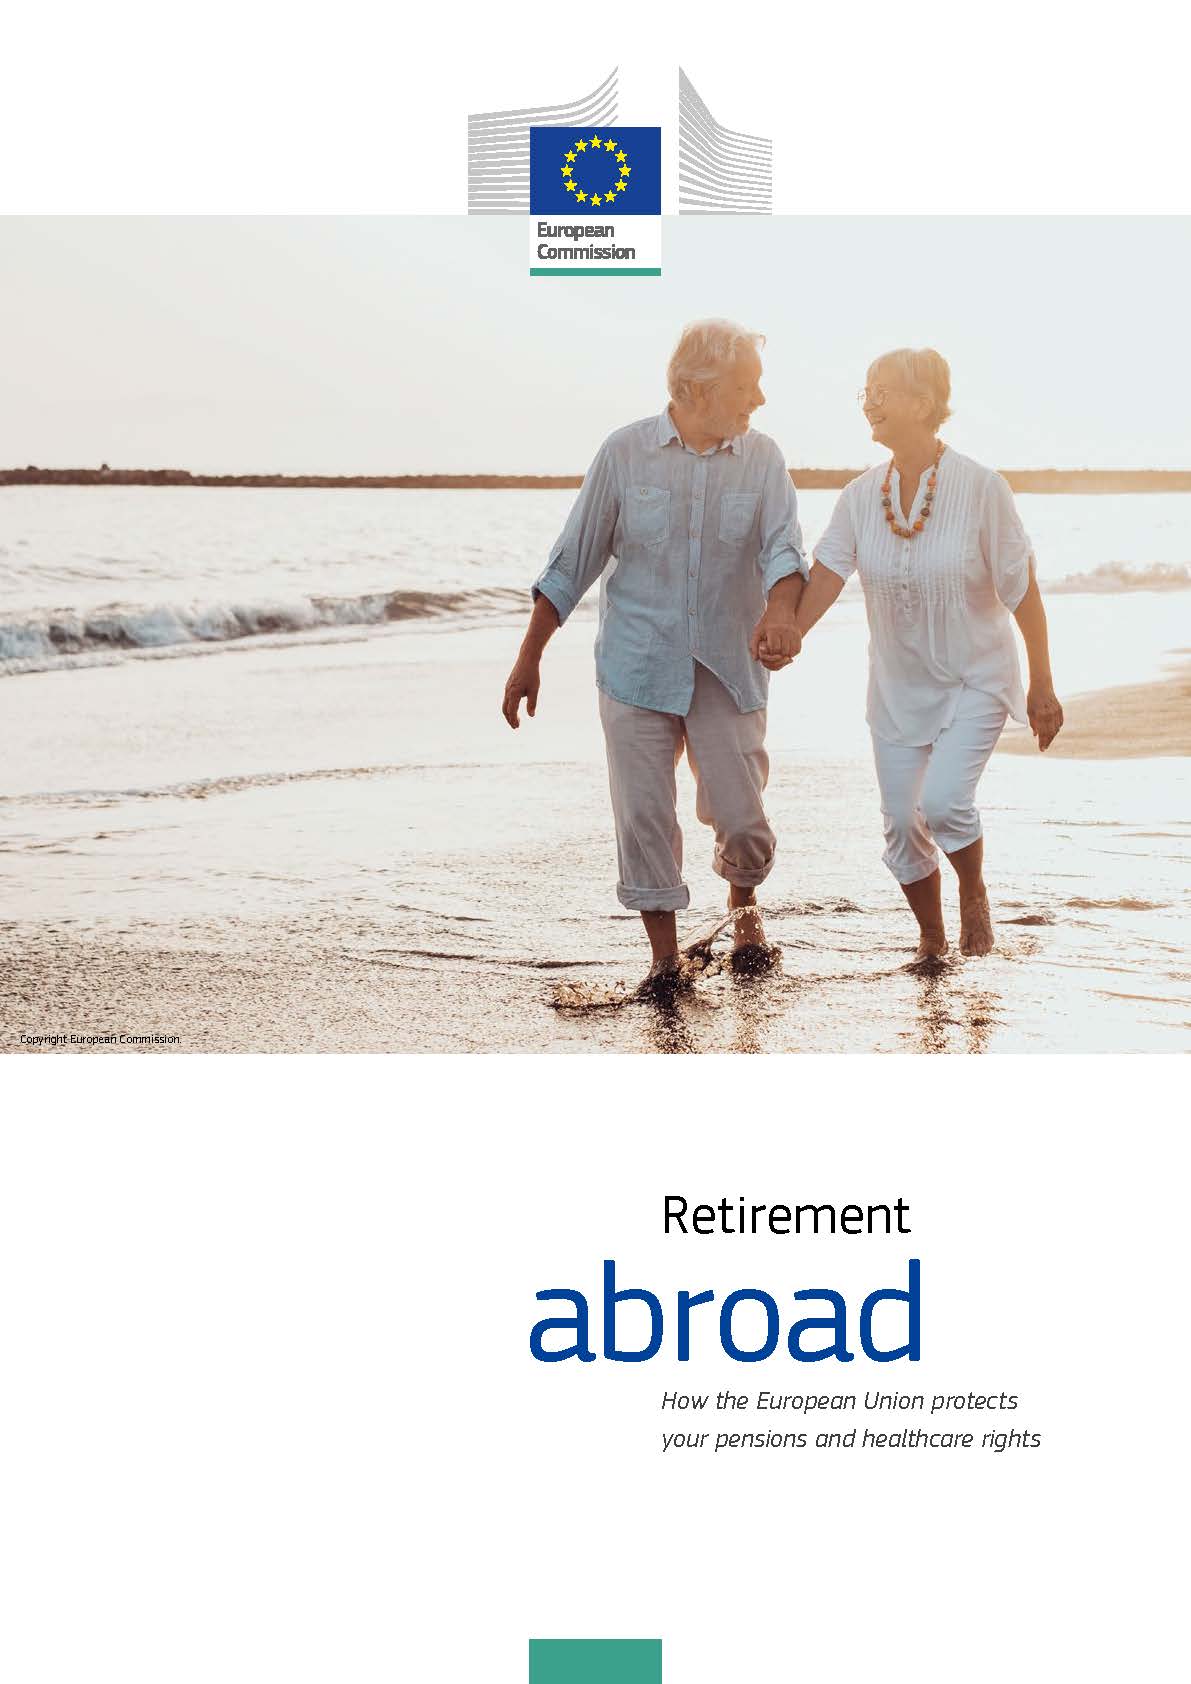 Retirement abroad - How the EU protect your pensions and healthcare rights